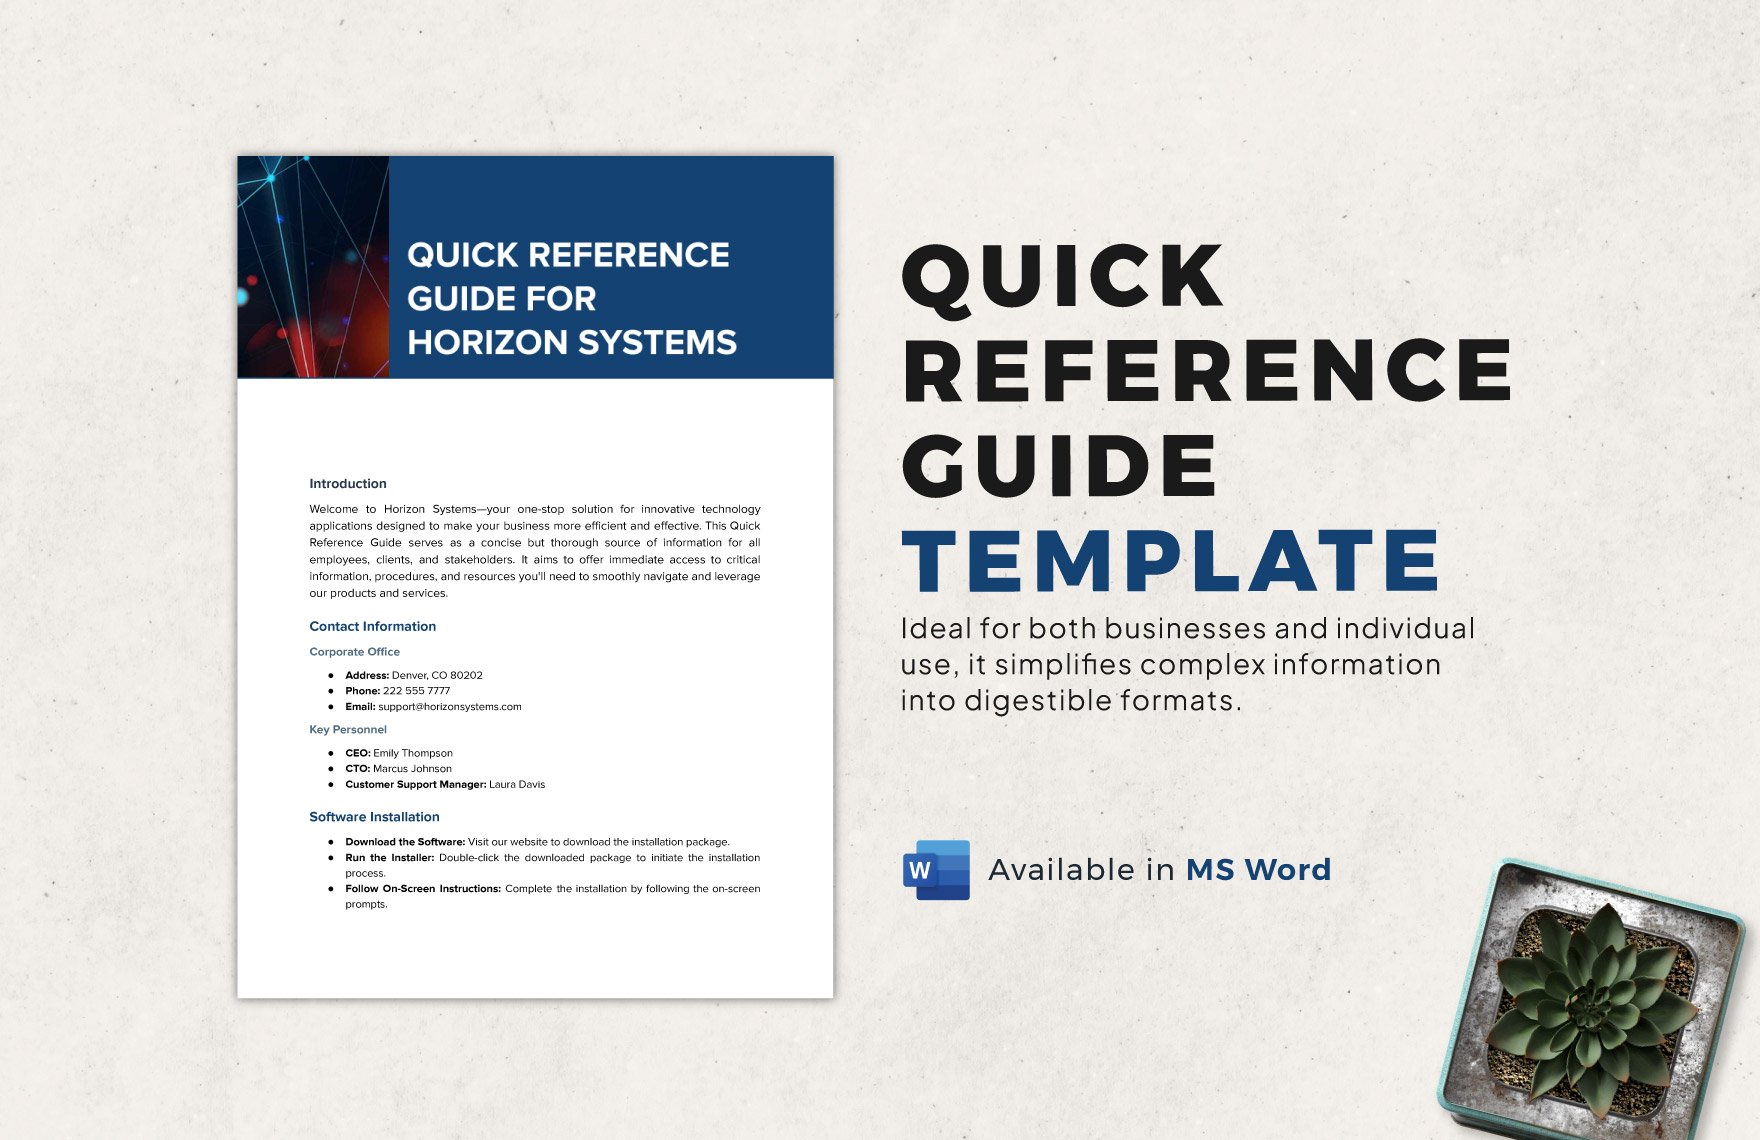 Quick Reference Guide Template in Word - Download | Template.net